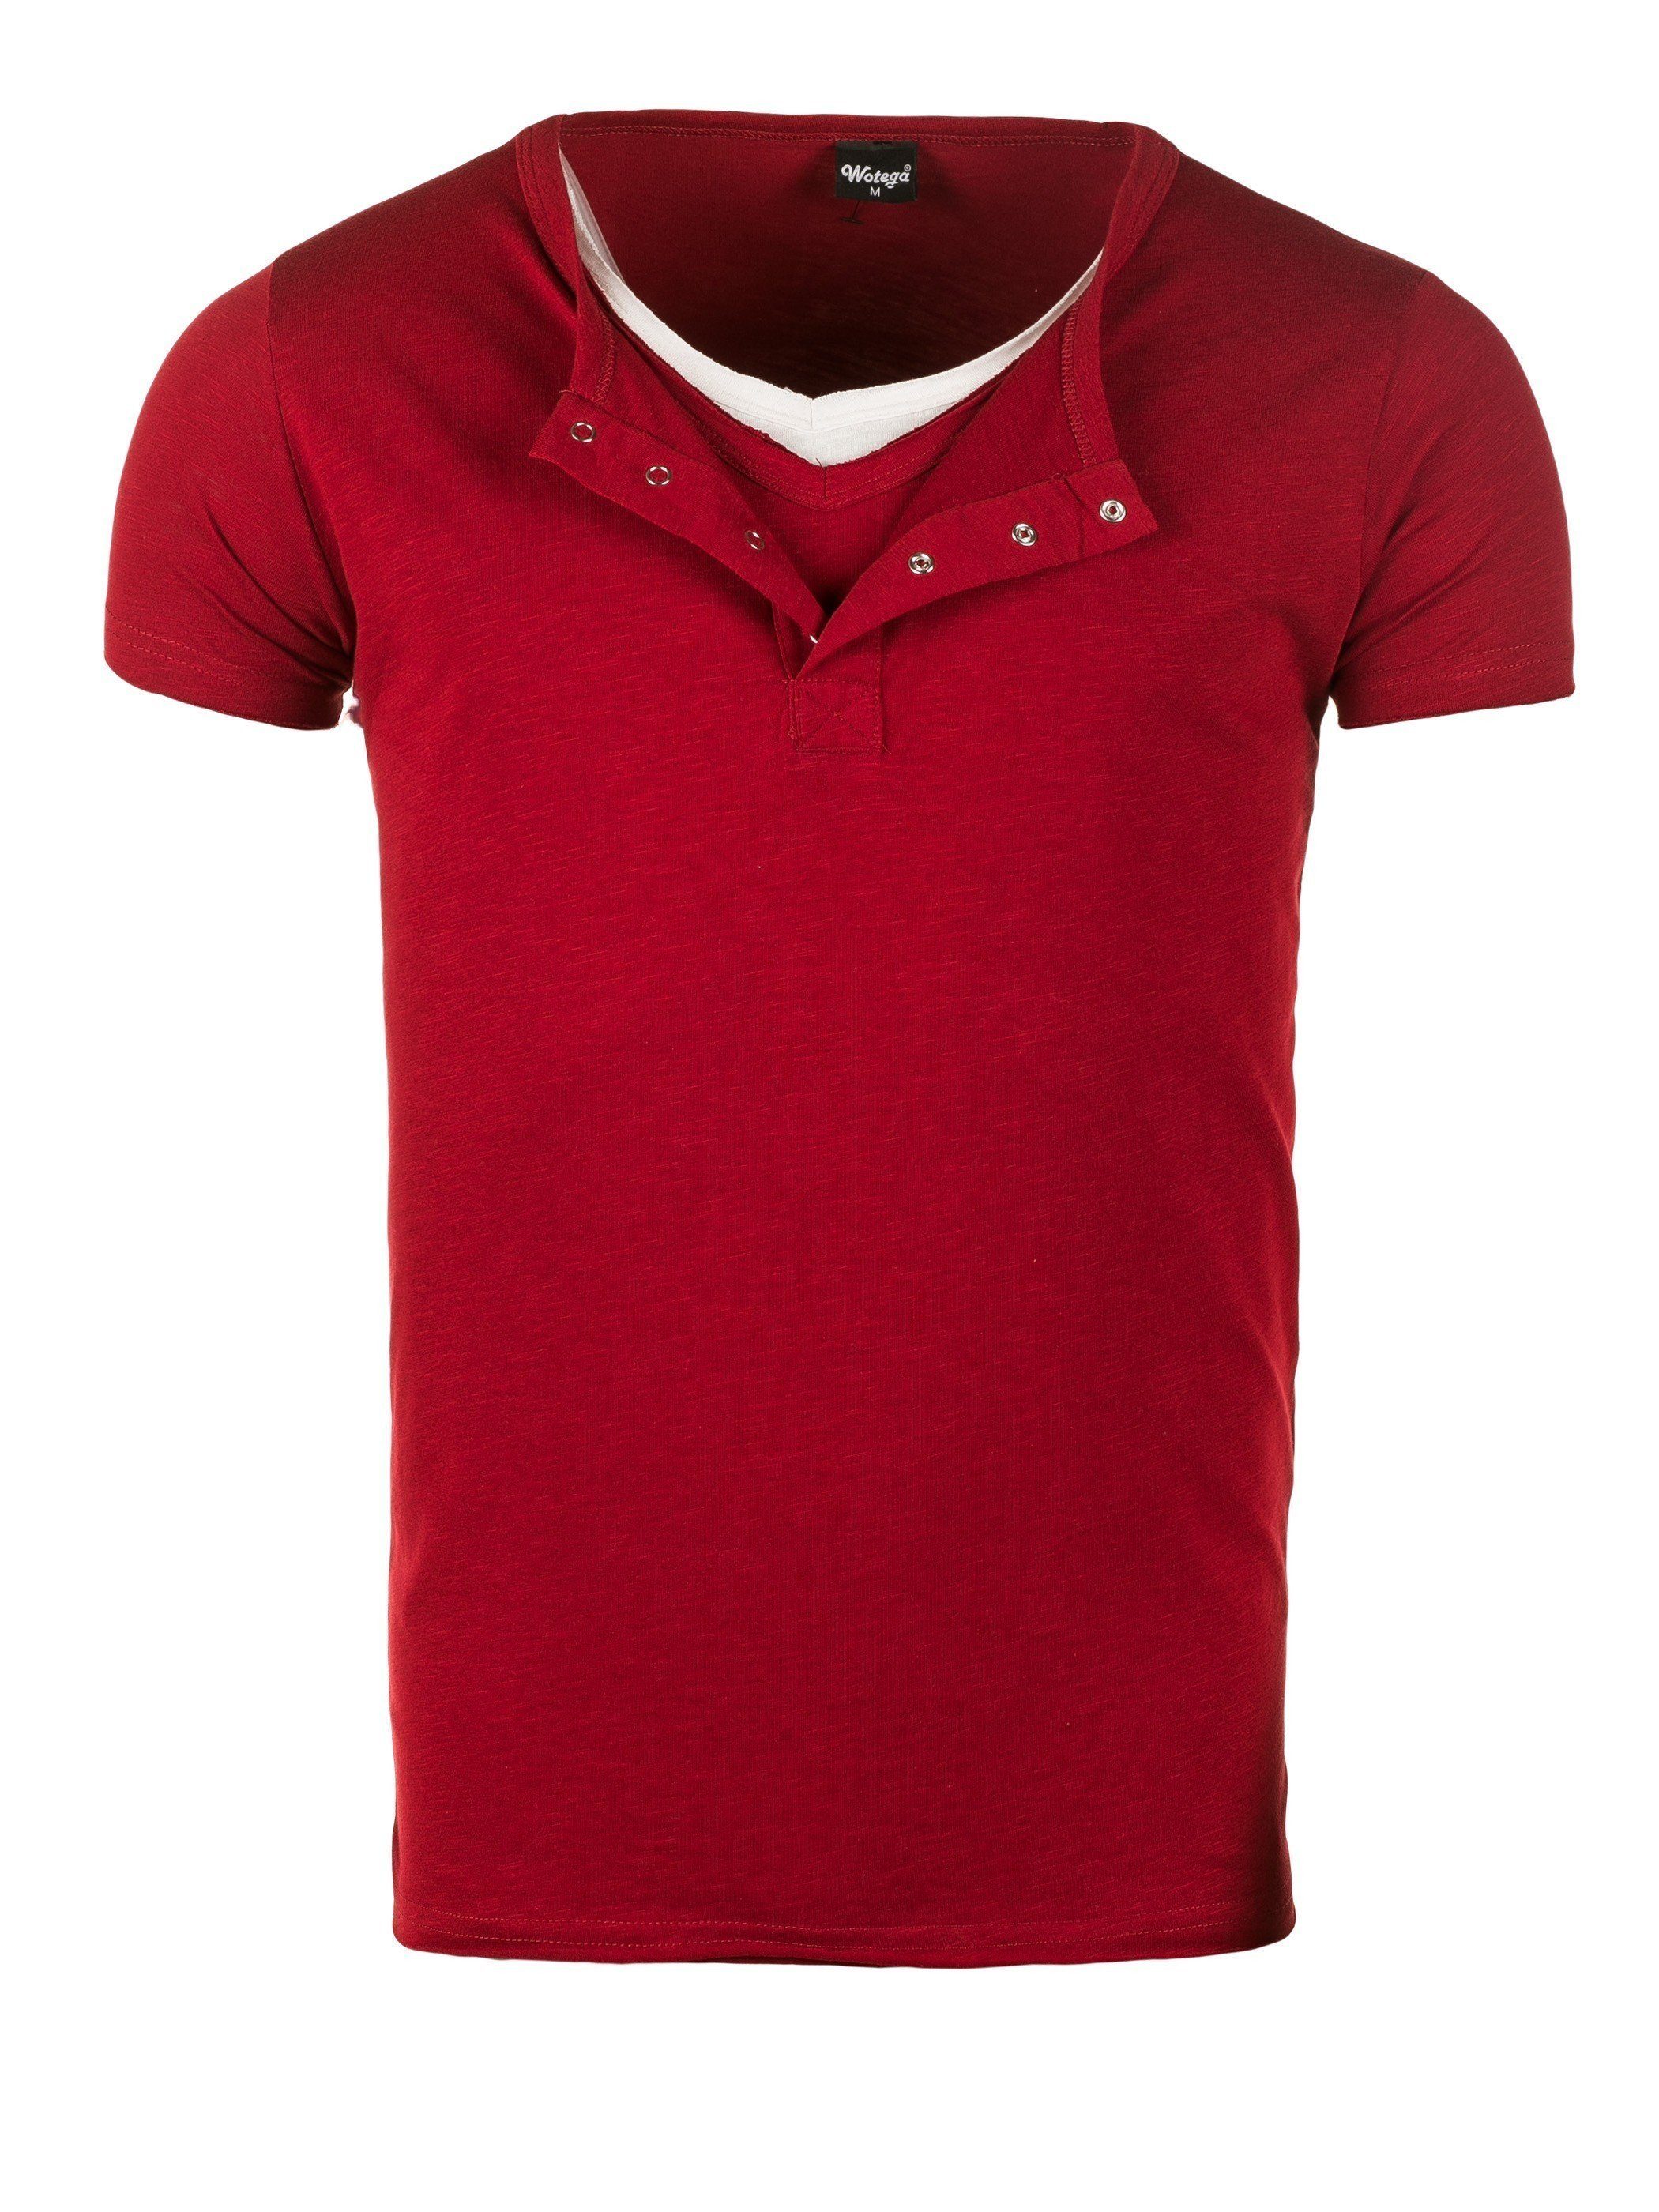 T-Shirt (Packung) T-Shirt T-Shirt V-Neck red Double Rot 190511) V-Neck Pete WOTEGA Pete Layer Layer Double (biking